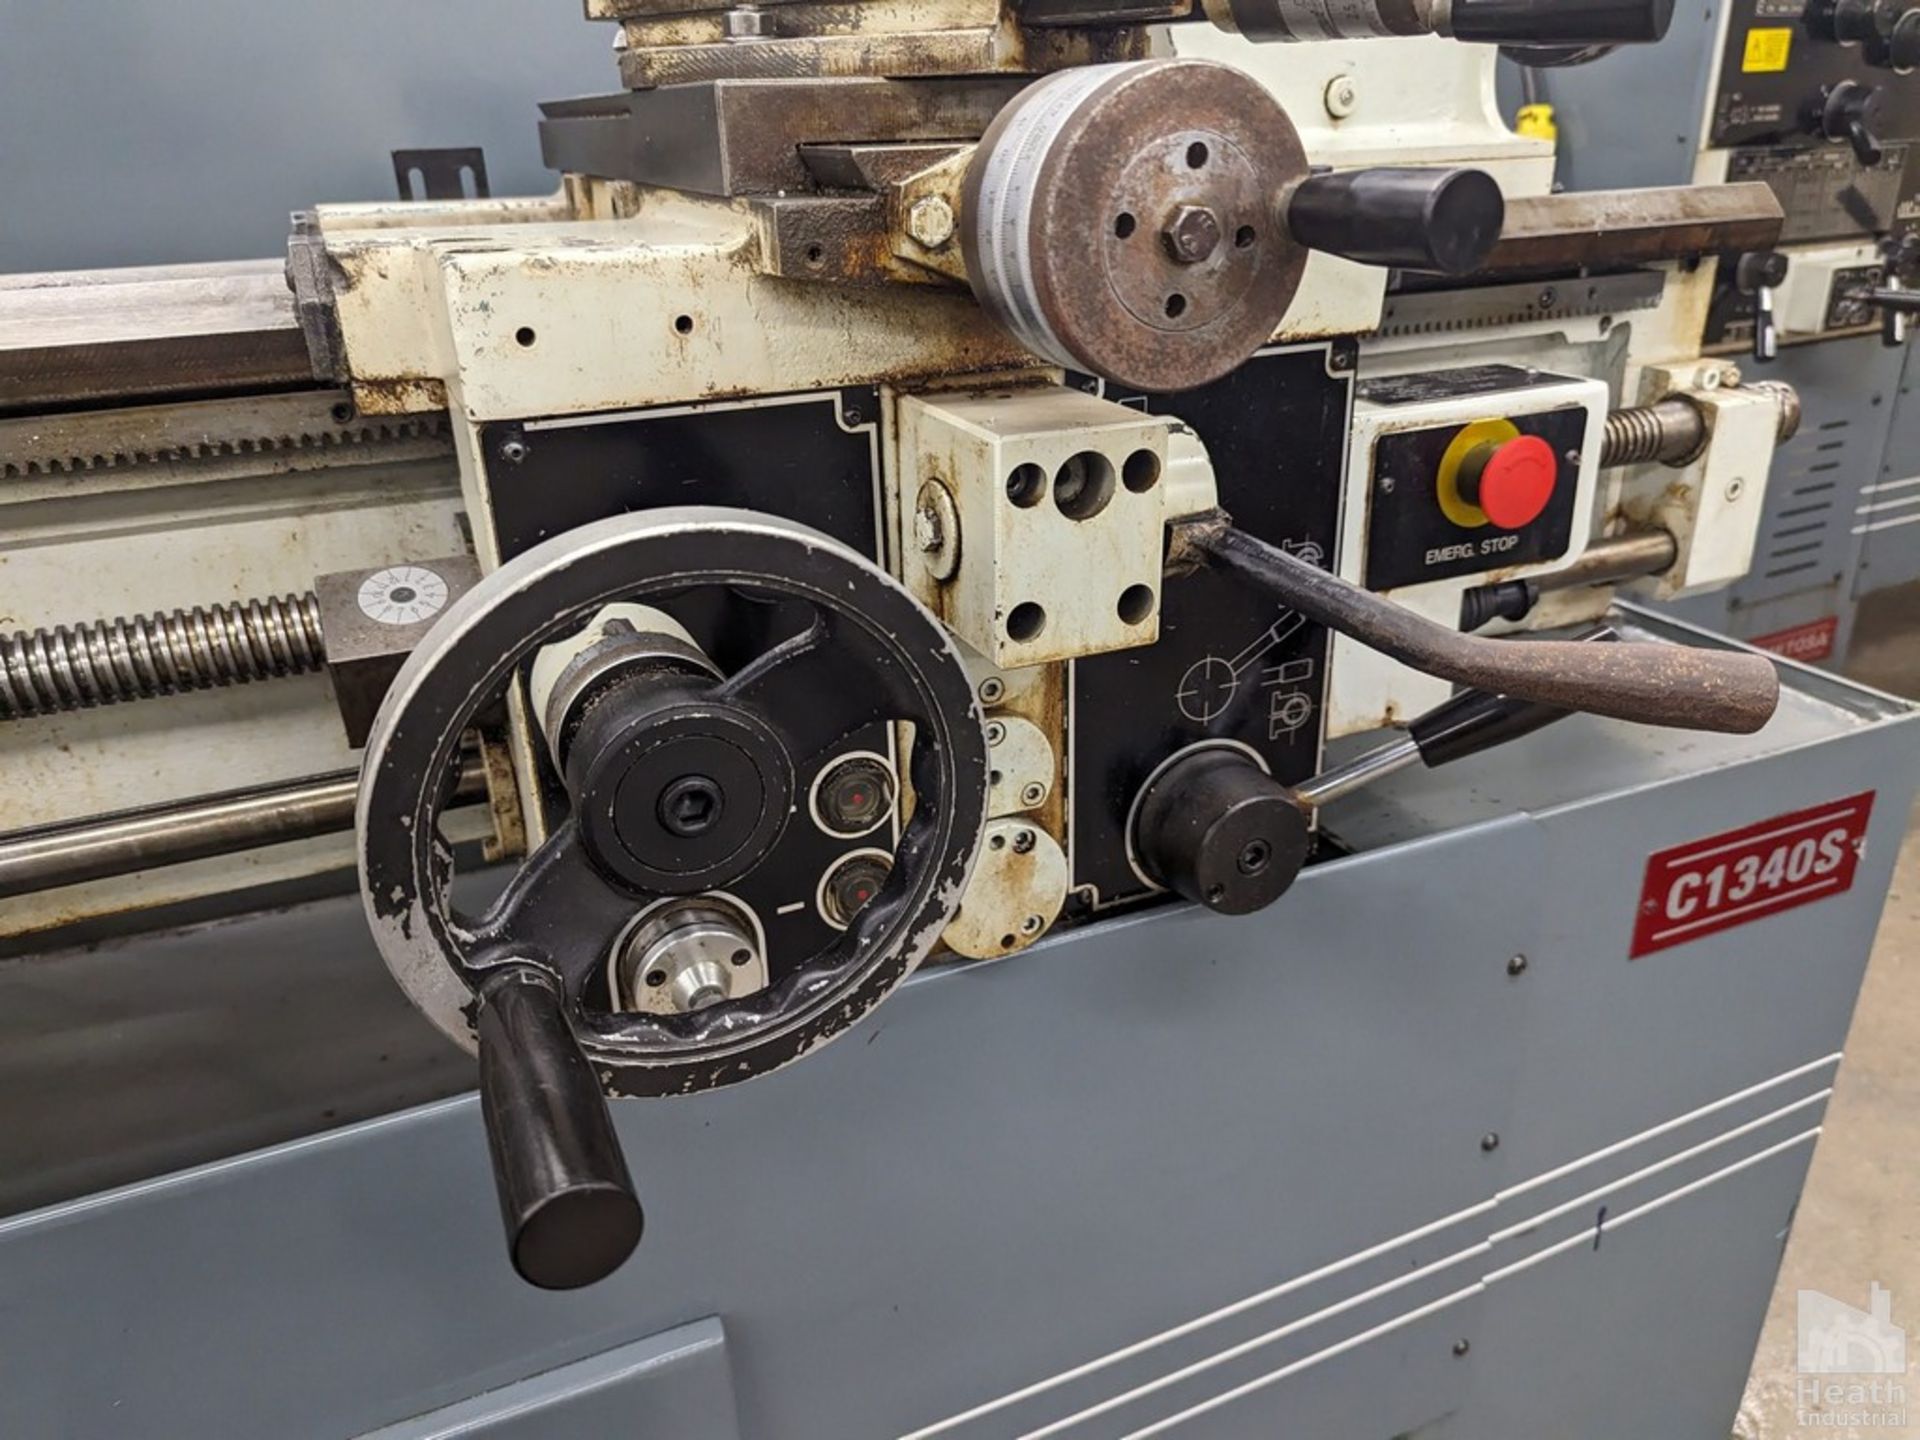 CLAUSING-METOSA 13"X40" MODEL 1340S TOOLROOM LATHE, S/N 41538, 2500 SPINDLE RPM, WITH TAPER - Image 7 of 7